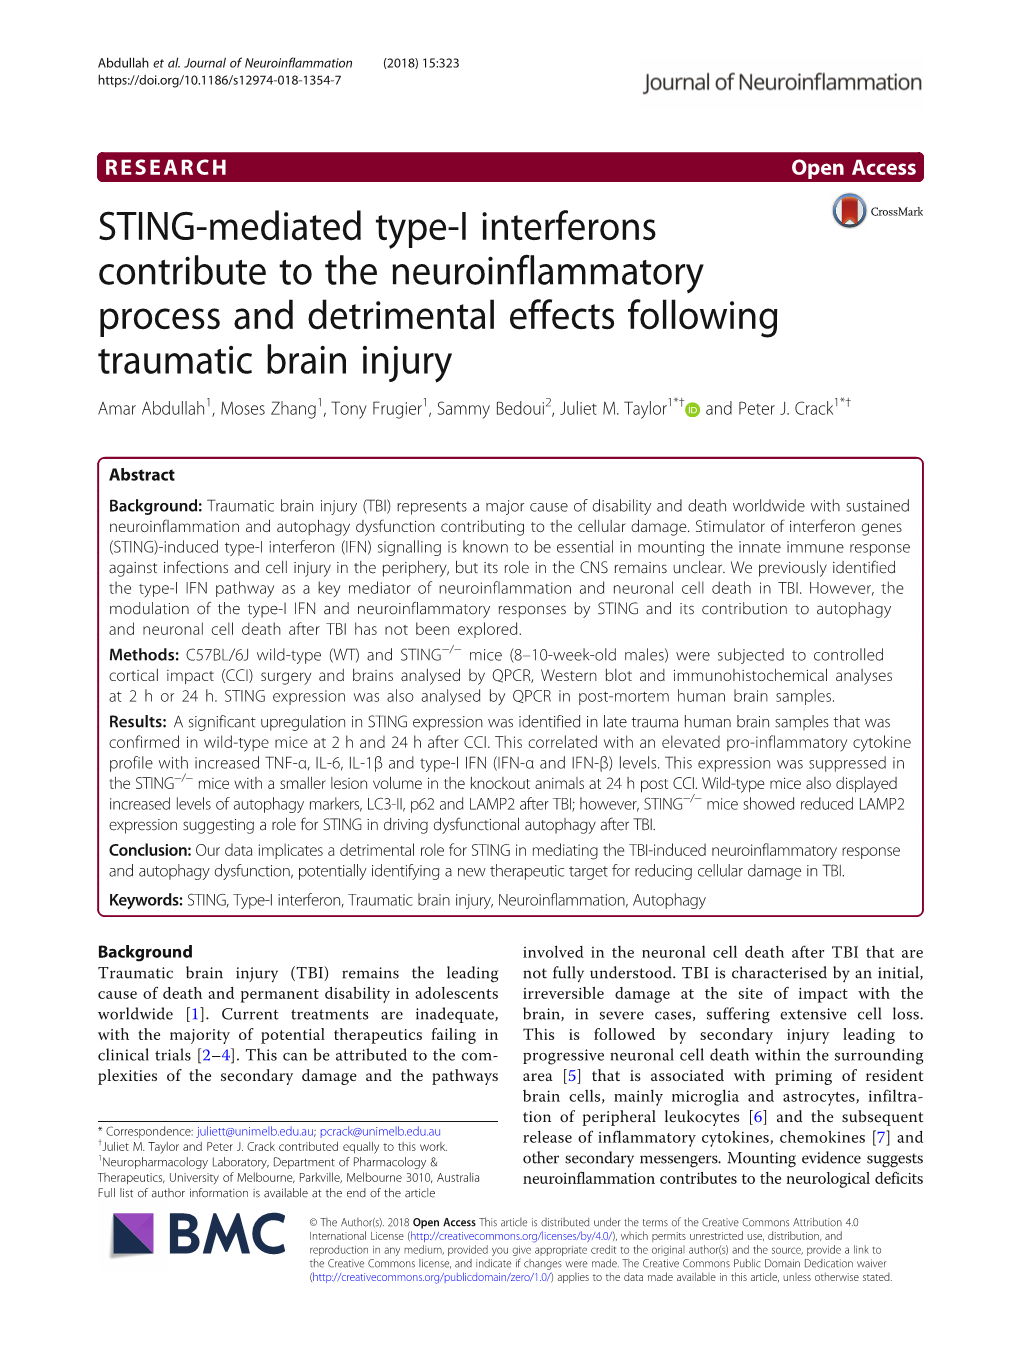 STING-Mediated Type-I Interferons Contribute to the Neuroinflammatory